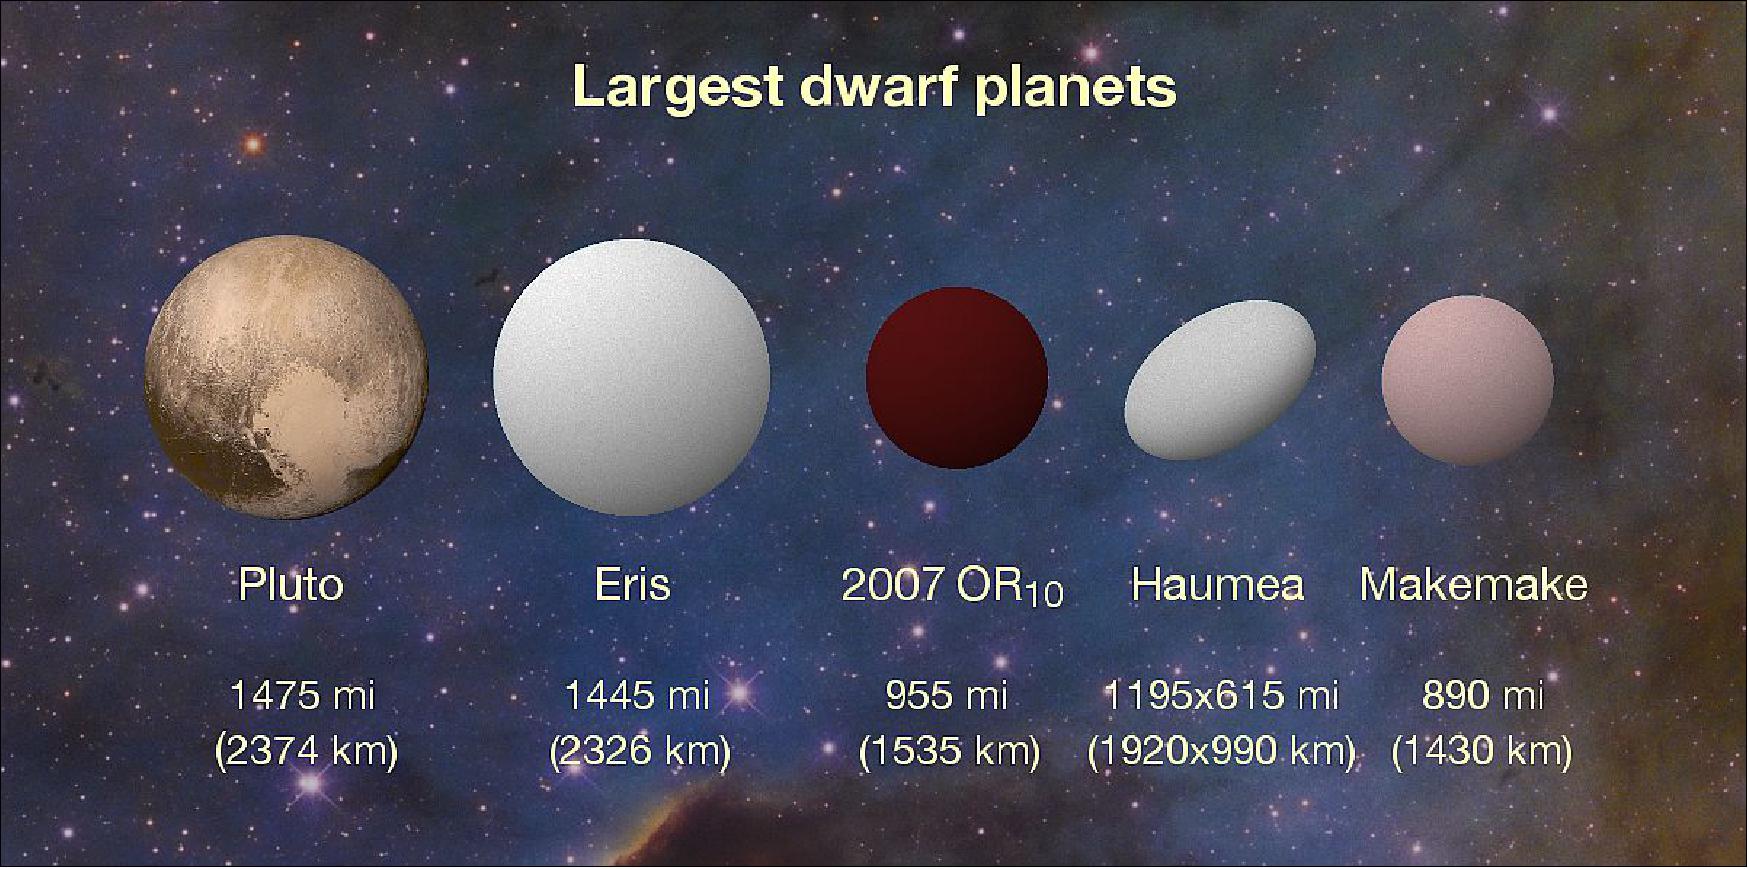 Figure 45: New K2 results peg 2007 OR10 as the largest unnamed body in our solar system and the third largest of the current roster of about half a dozen dwarf planets. The revised measurement of 2007 OR10's diameter, 1,535 km, is about 100 km greater than the next largest dwarf planet, Makemake, or about one-third smaller than Pluto. Another dwarf planet, named Haumea, has an oblong shape that is wider on its long axis than 2007 OR10, but its overall volume is smaller (image credit: Konkoly Observatory/András Pál, Hungarian Astronomical Association/Iván Éder, NASA/JHUAPL/SwRI)